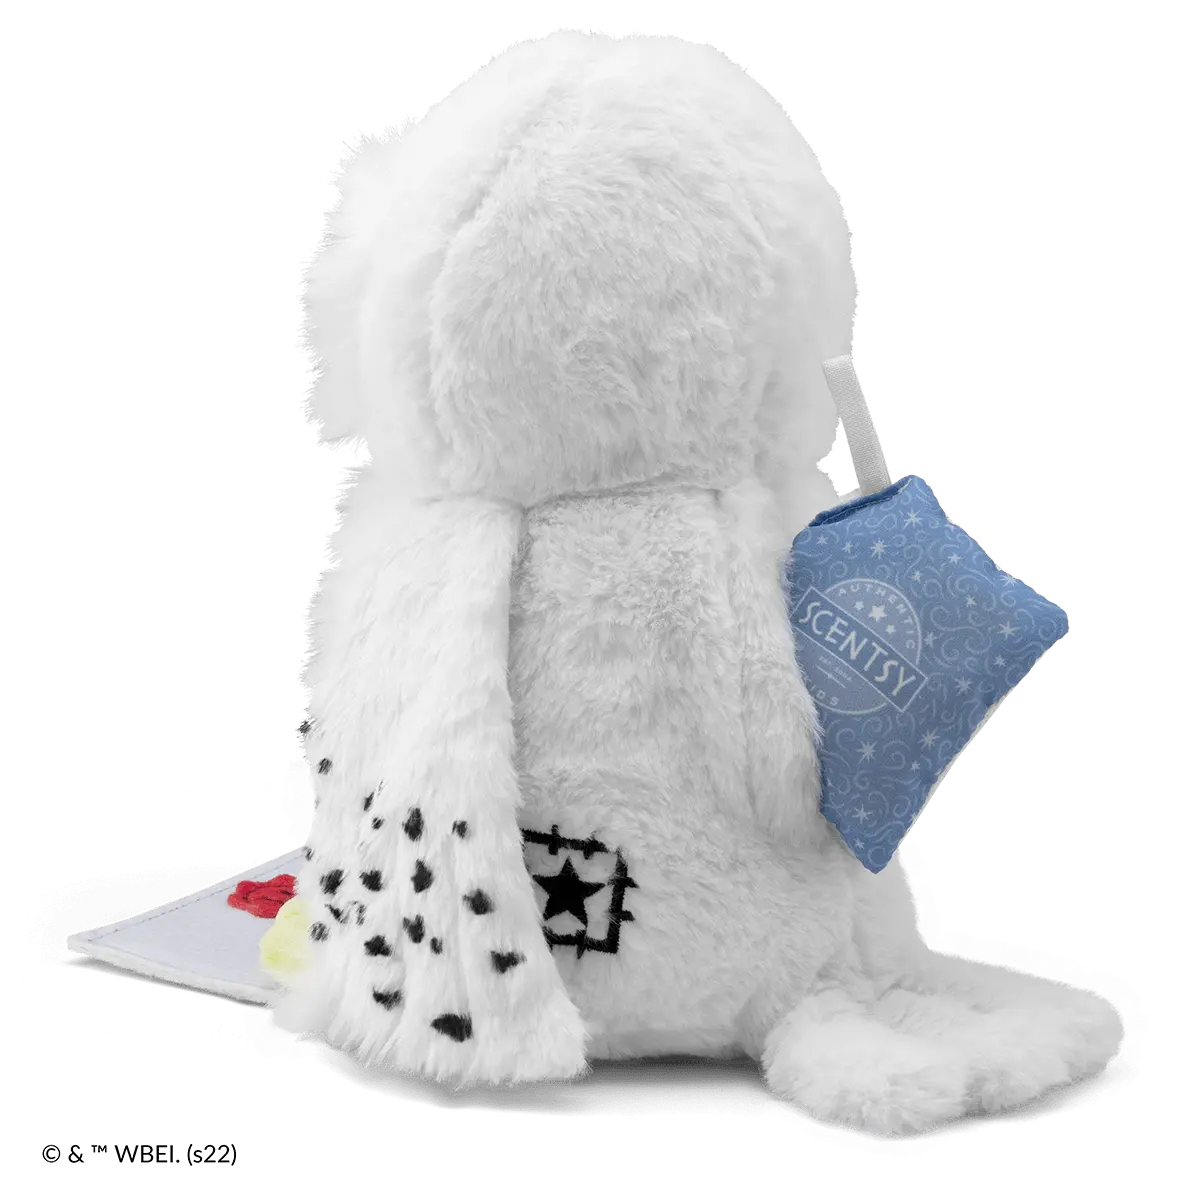 Harry Potter™ – Scentsy Buddy – Scentsy Online Store – Gimme More Scents –  Buy Scentsy Wax Bars, Scentsy Warmers, Scentsy Laundry Products & More